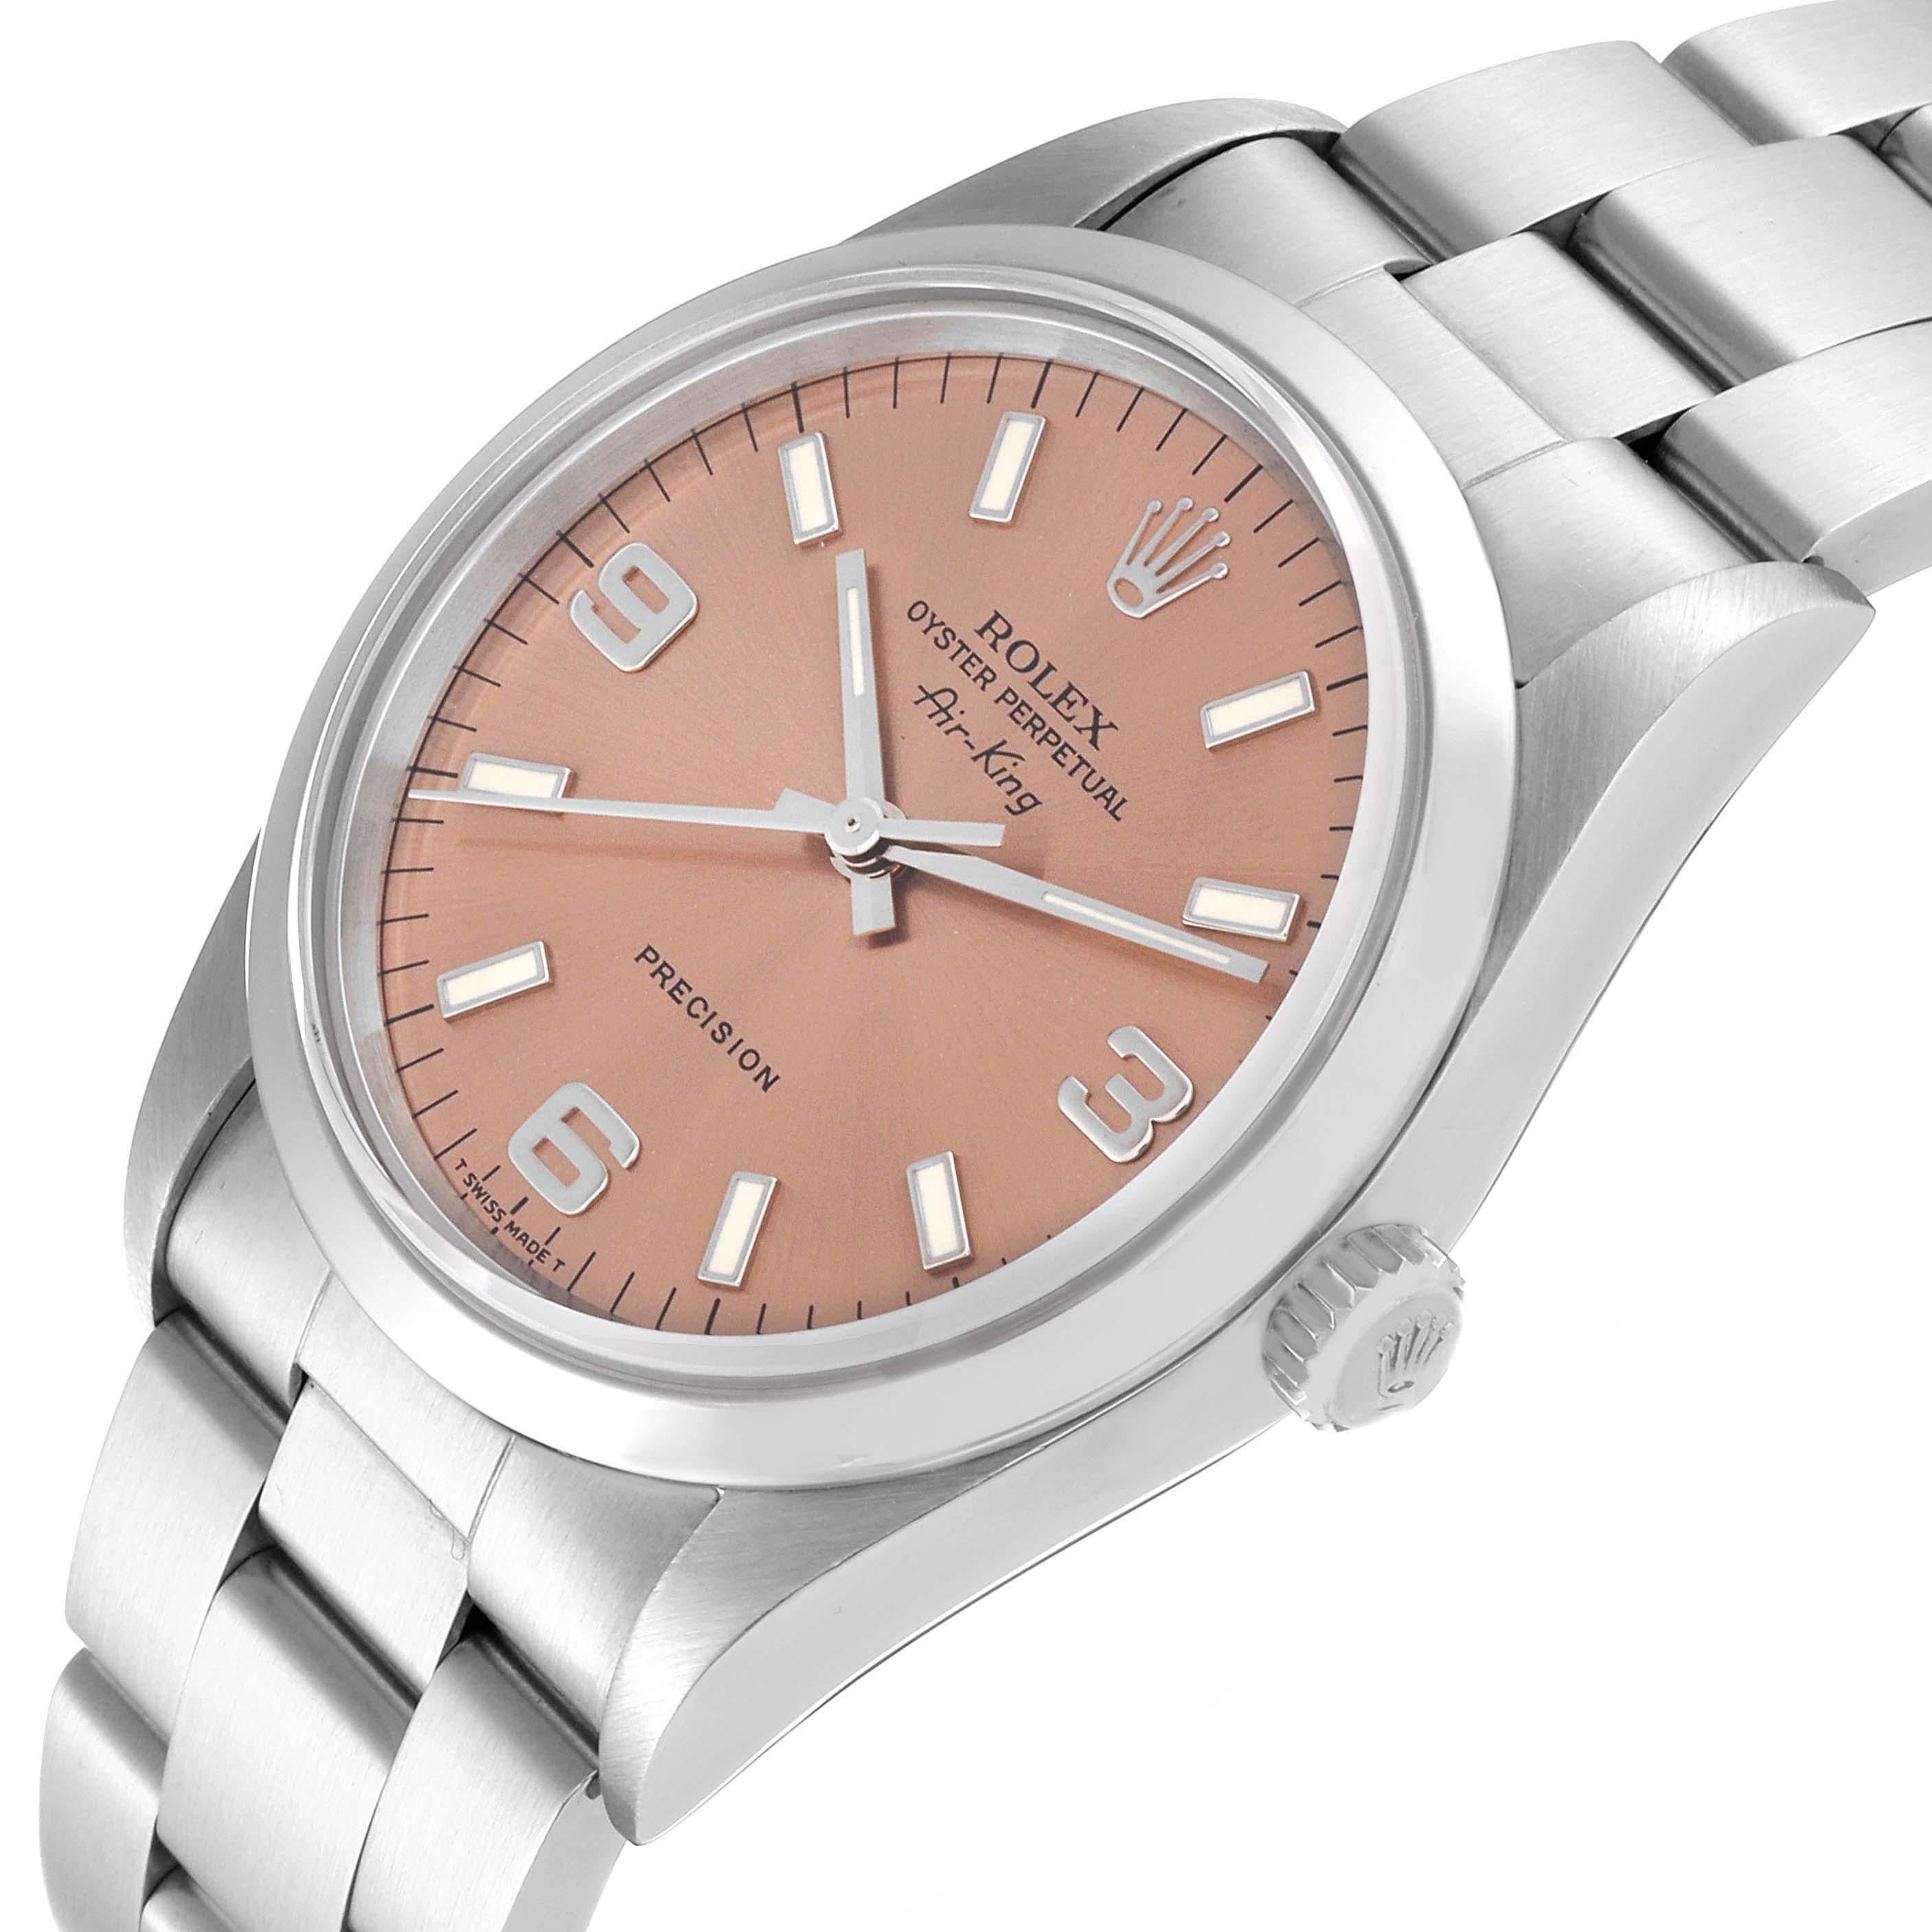 Rolex Air King Salmon Dial Smooth Bezel Steel Mens Watch 14000 In Excellent Condition For Sale In Atlanta, GA